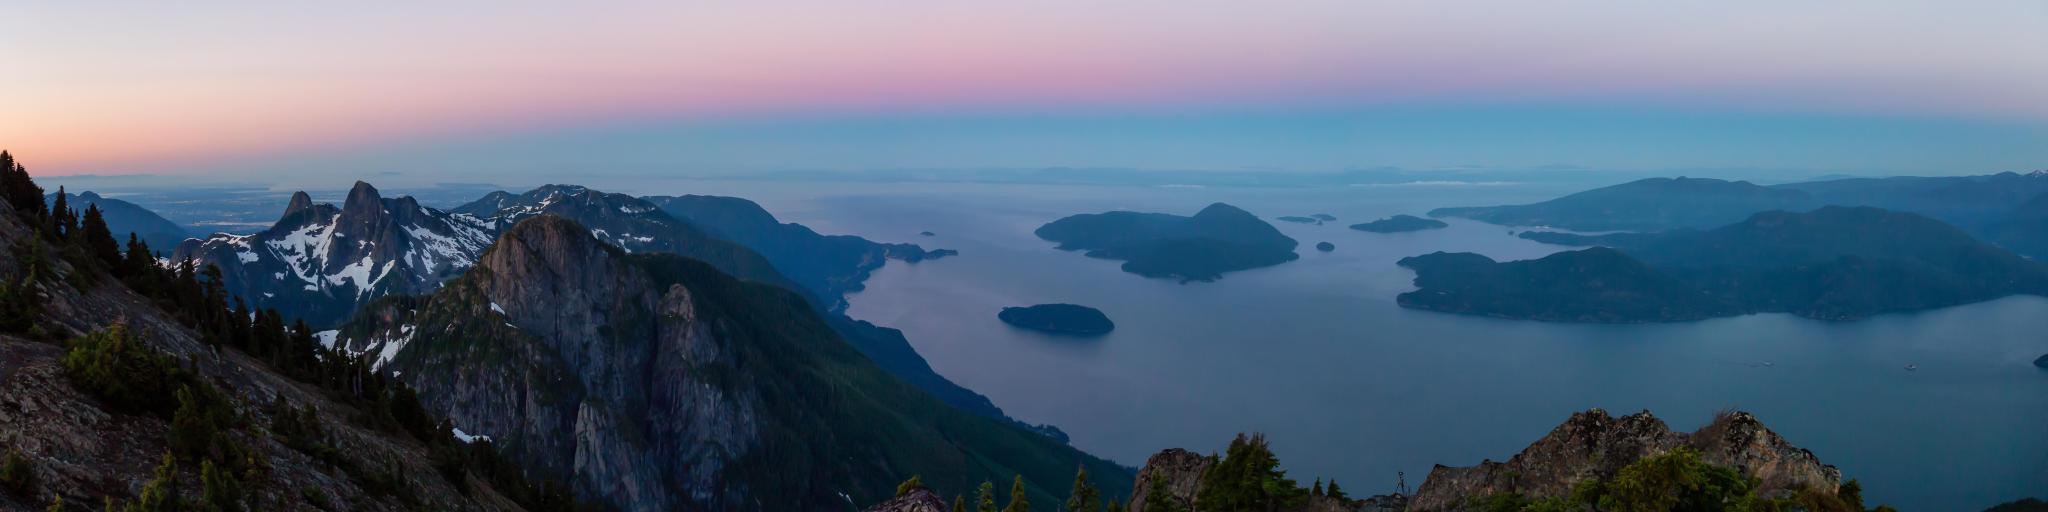 Panoramic view of Howe Sound, North of Vancouver, taken at sunset from the top of a mountain with a little snow remaining, showing the ocean and small islands